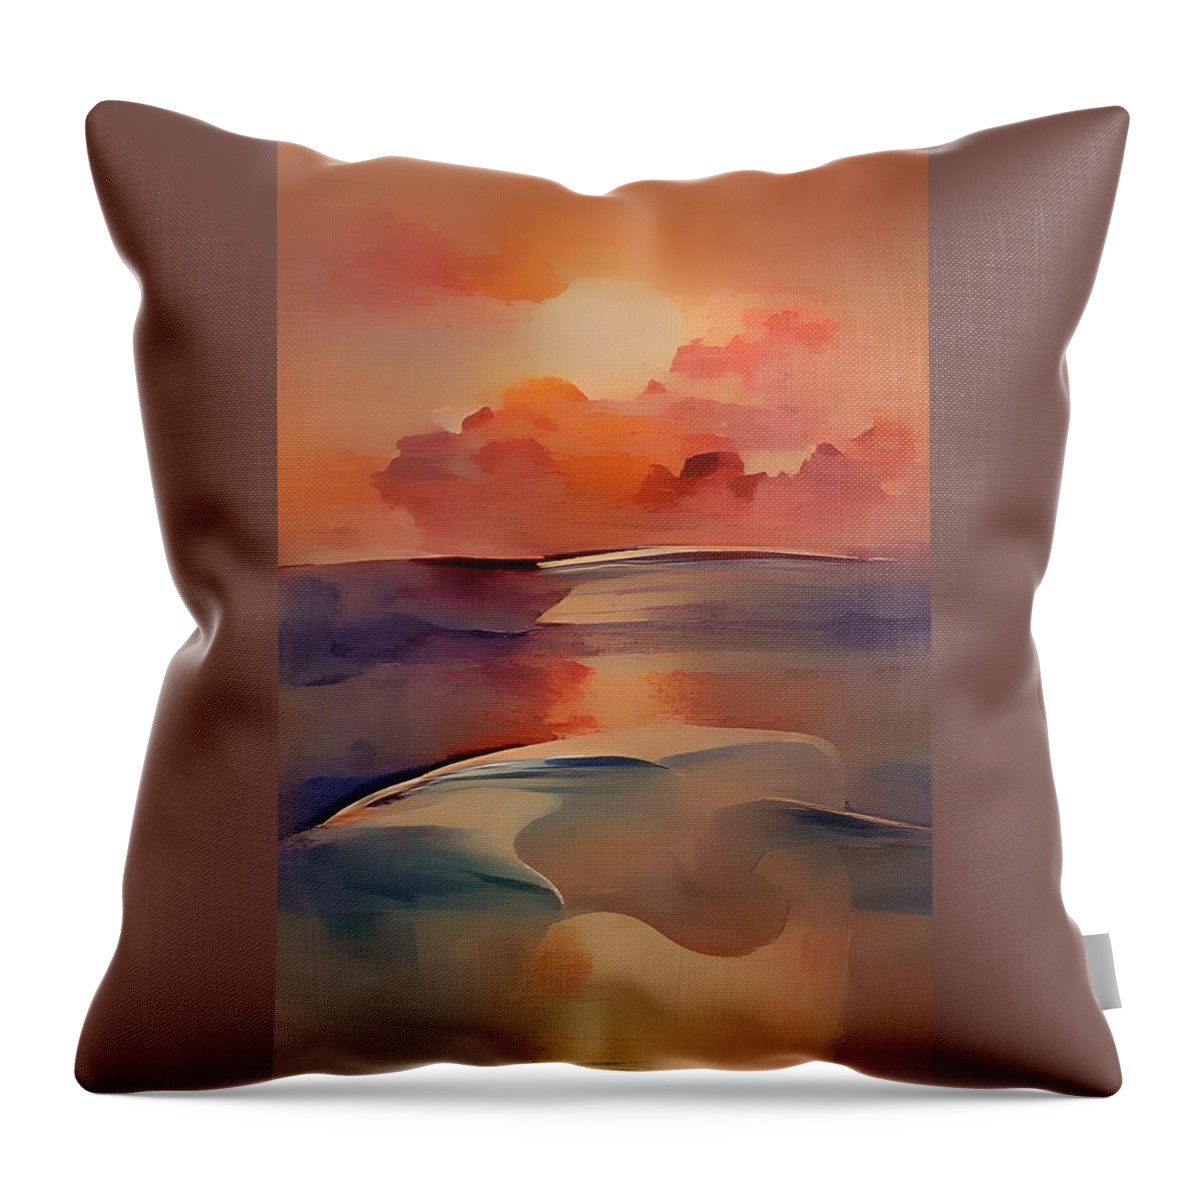  Throw Pillow featuring the digital art Flyby by Rod Turner